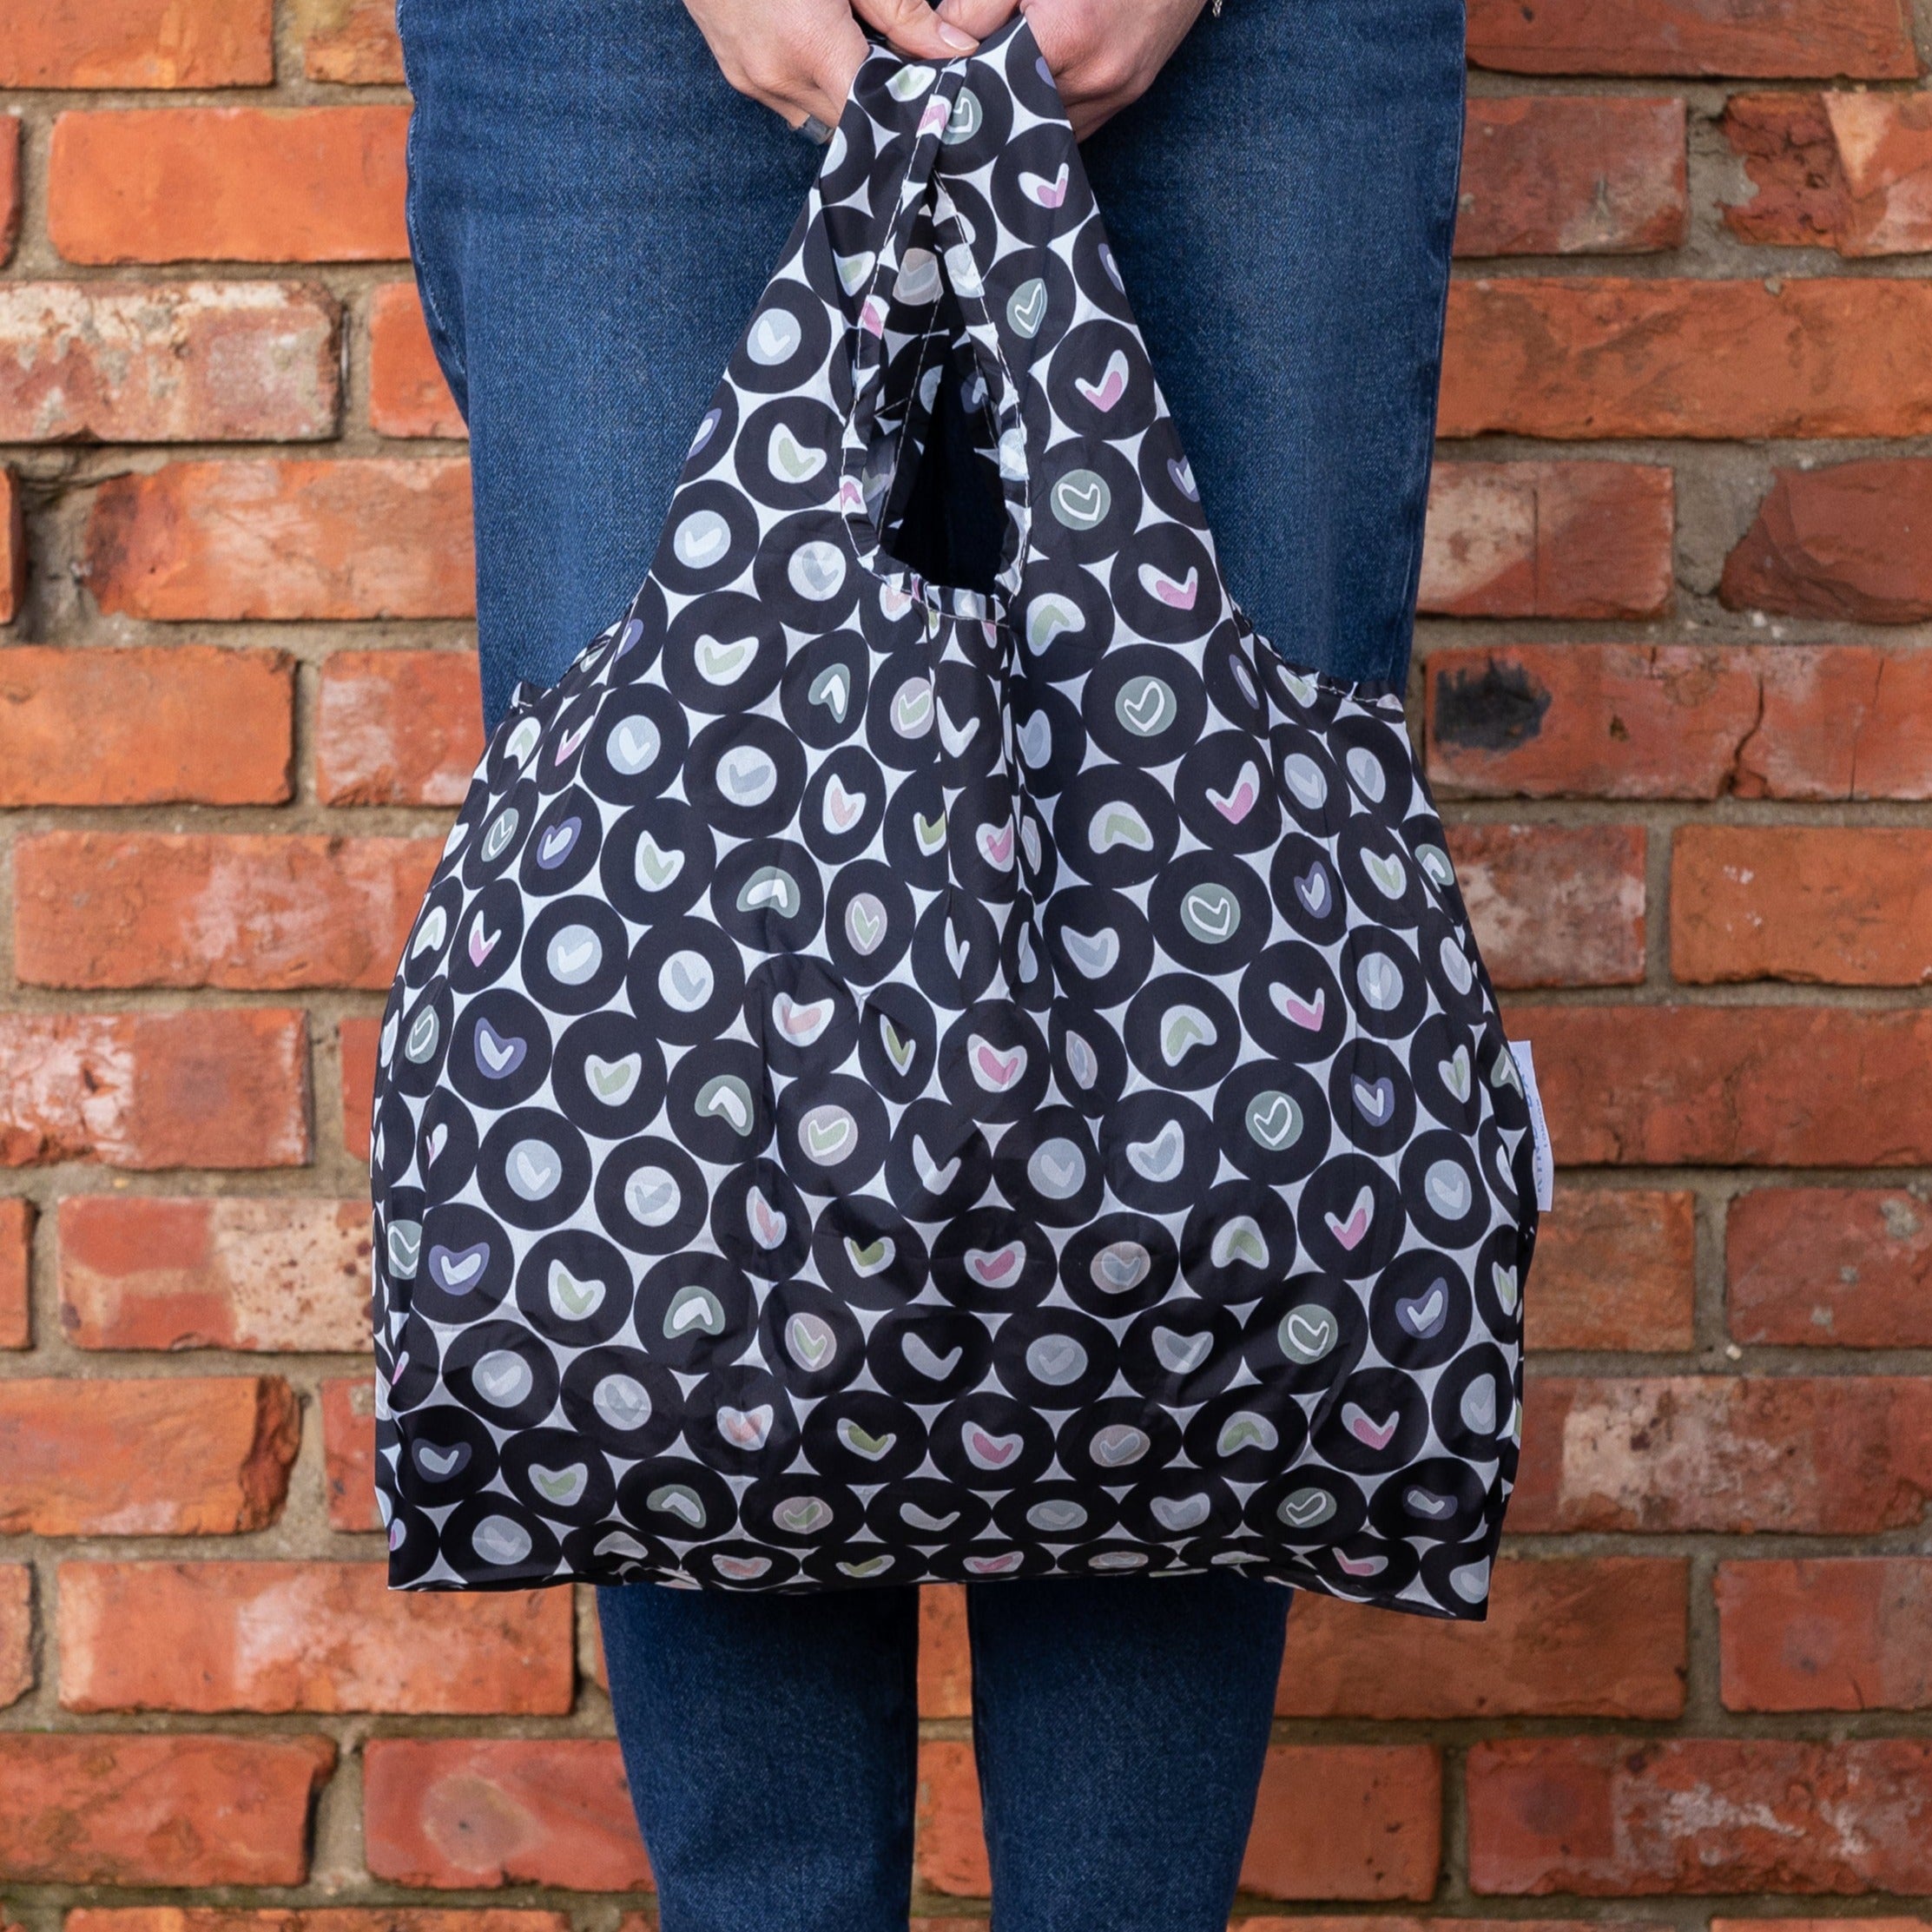 Sue Timney- Dark Hearts - Recycled Packable Shopping Bag